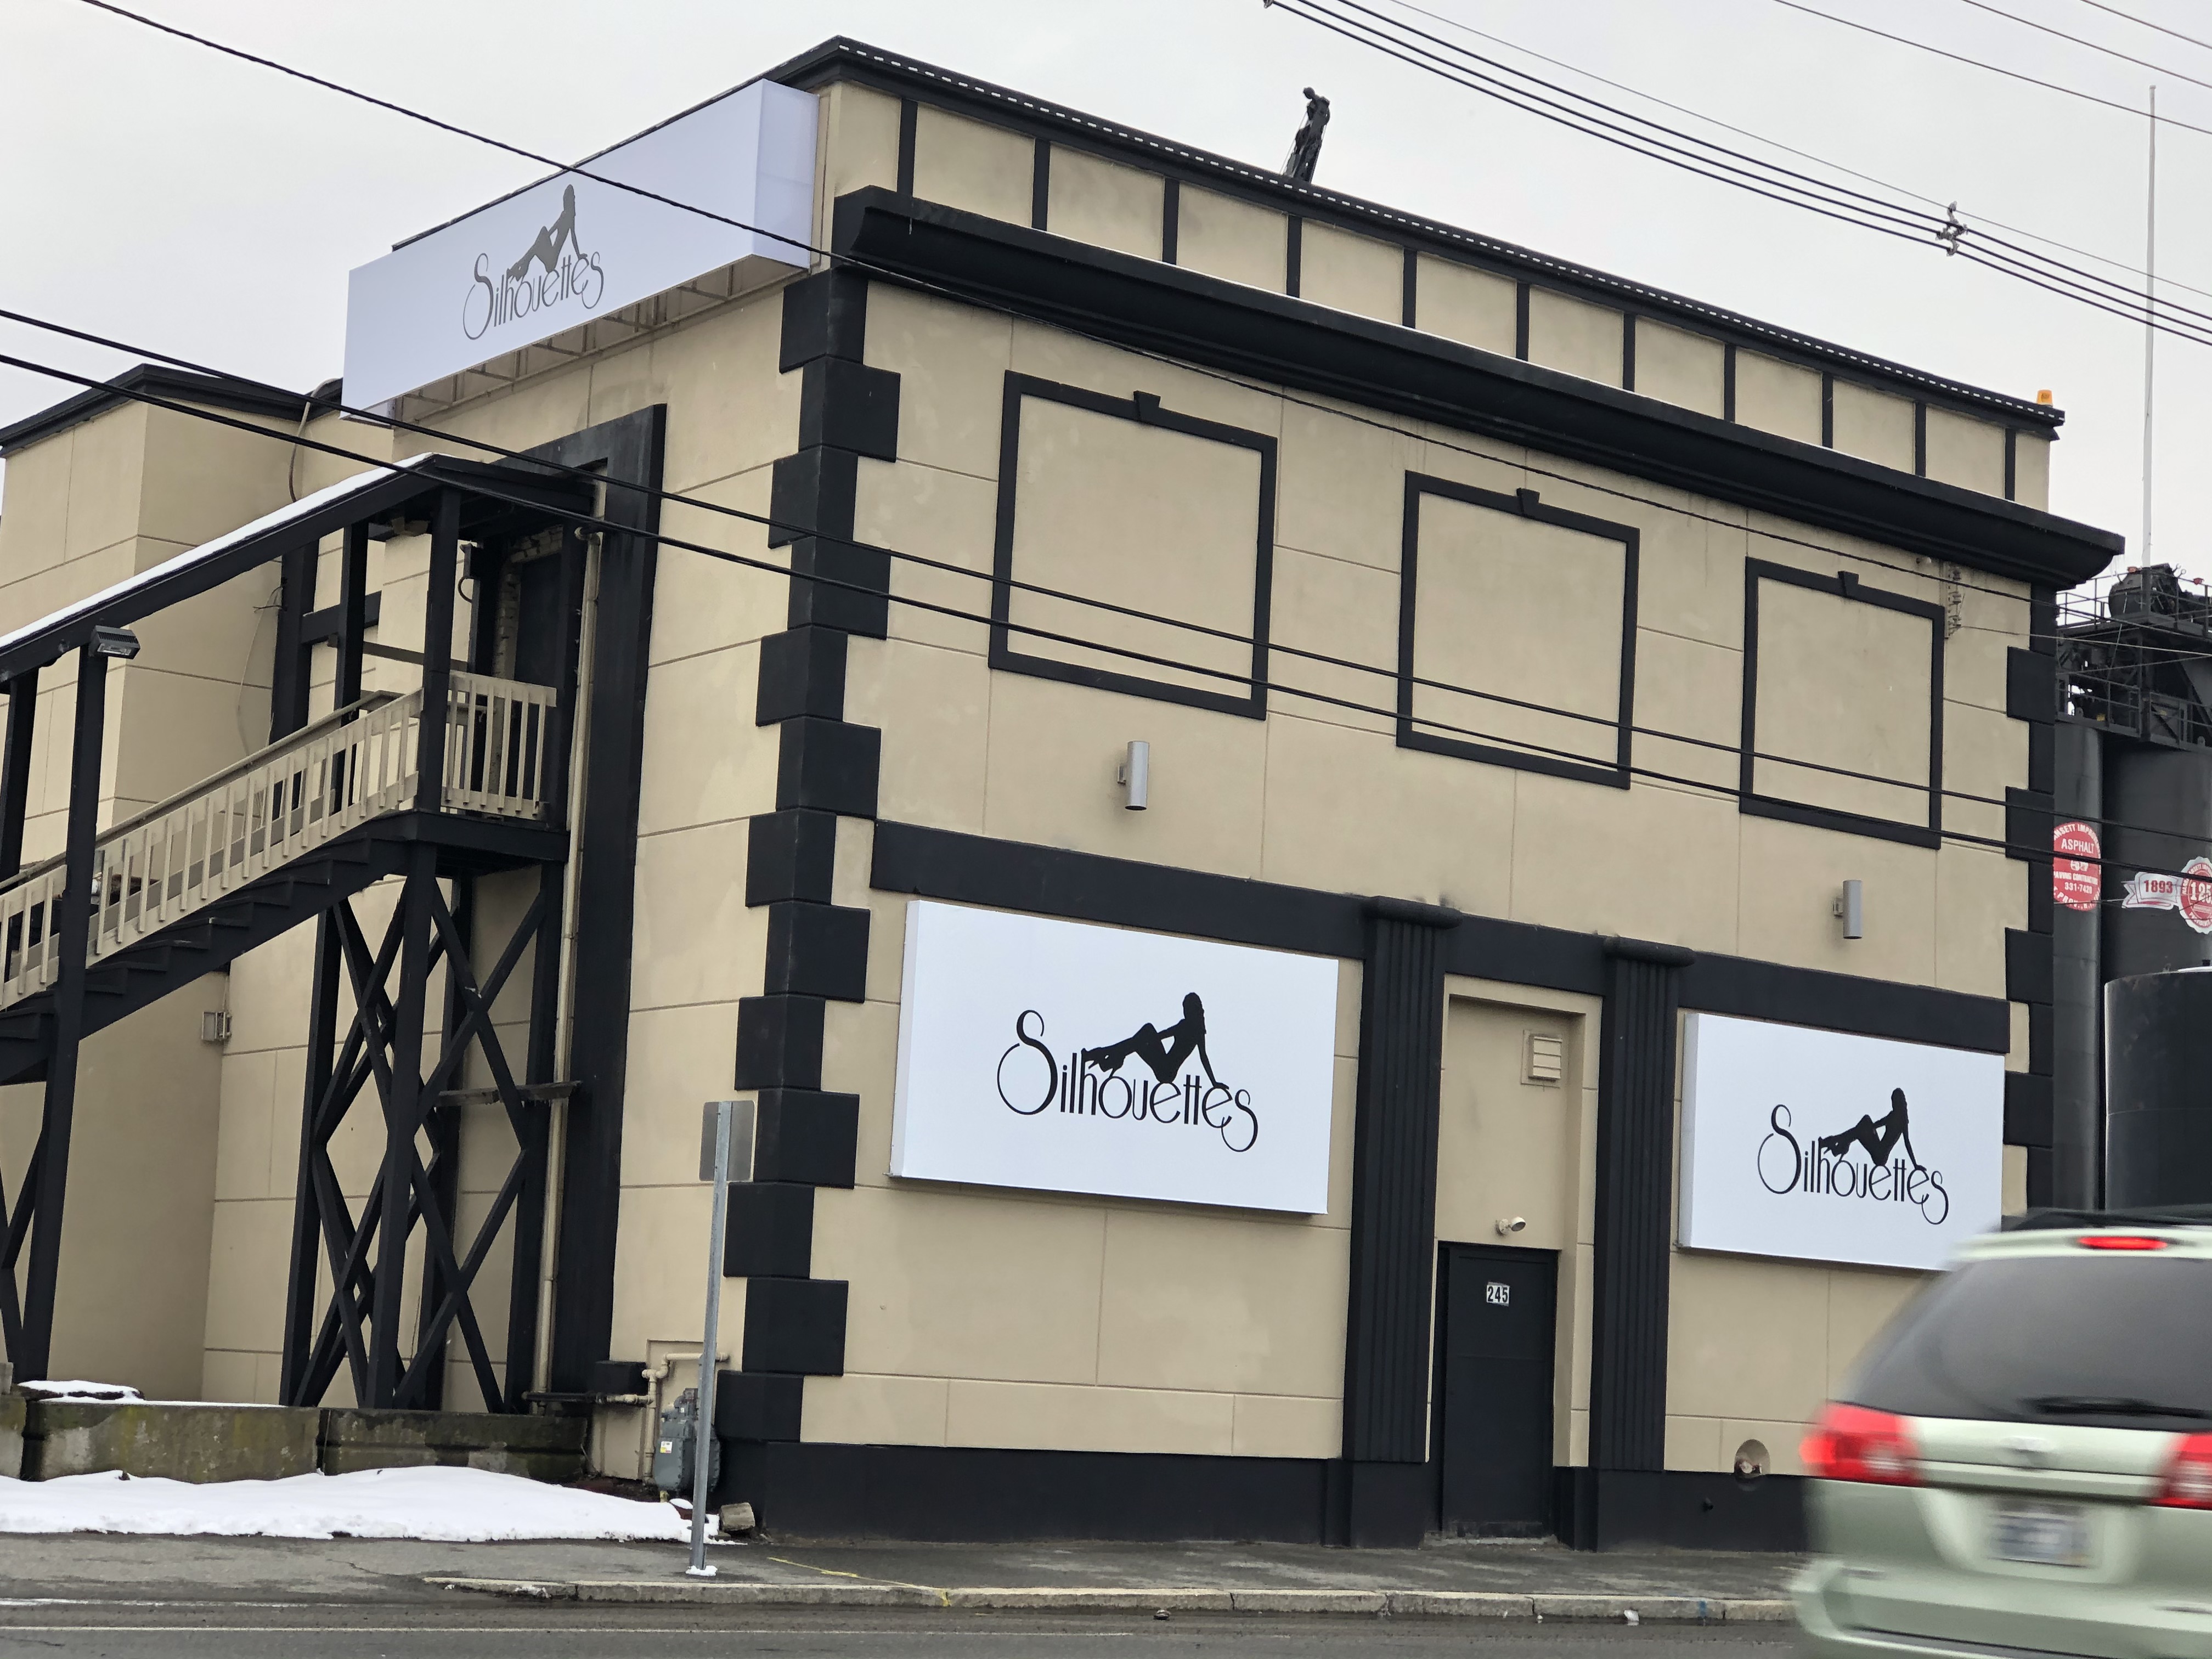 A strip club site in Providence tries to shake off its sordid past image pic